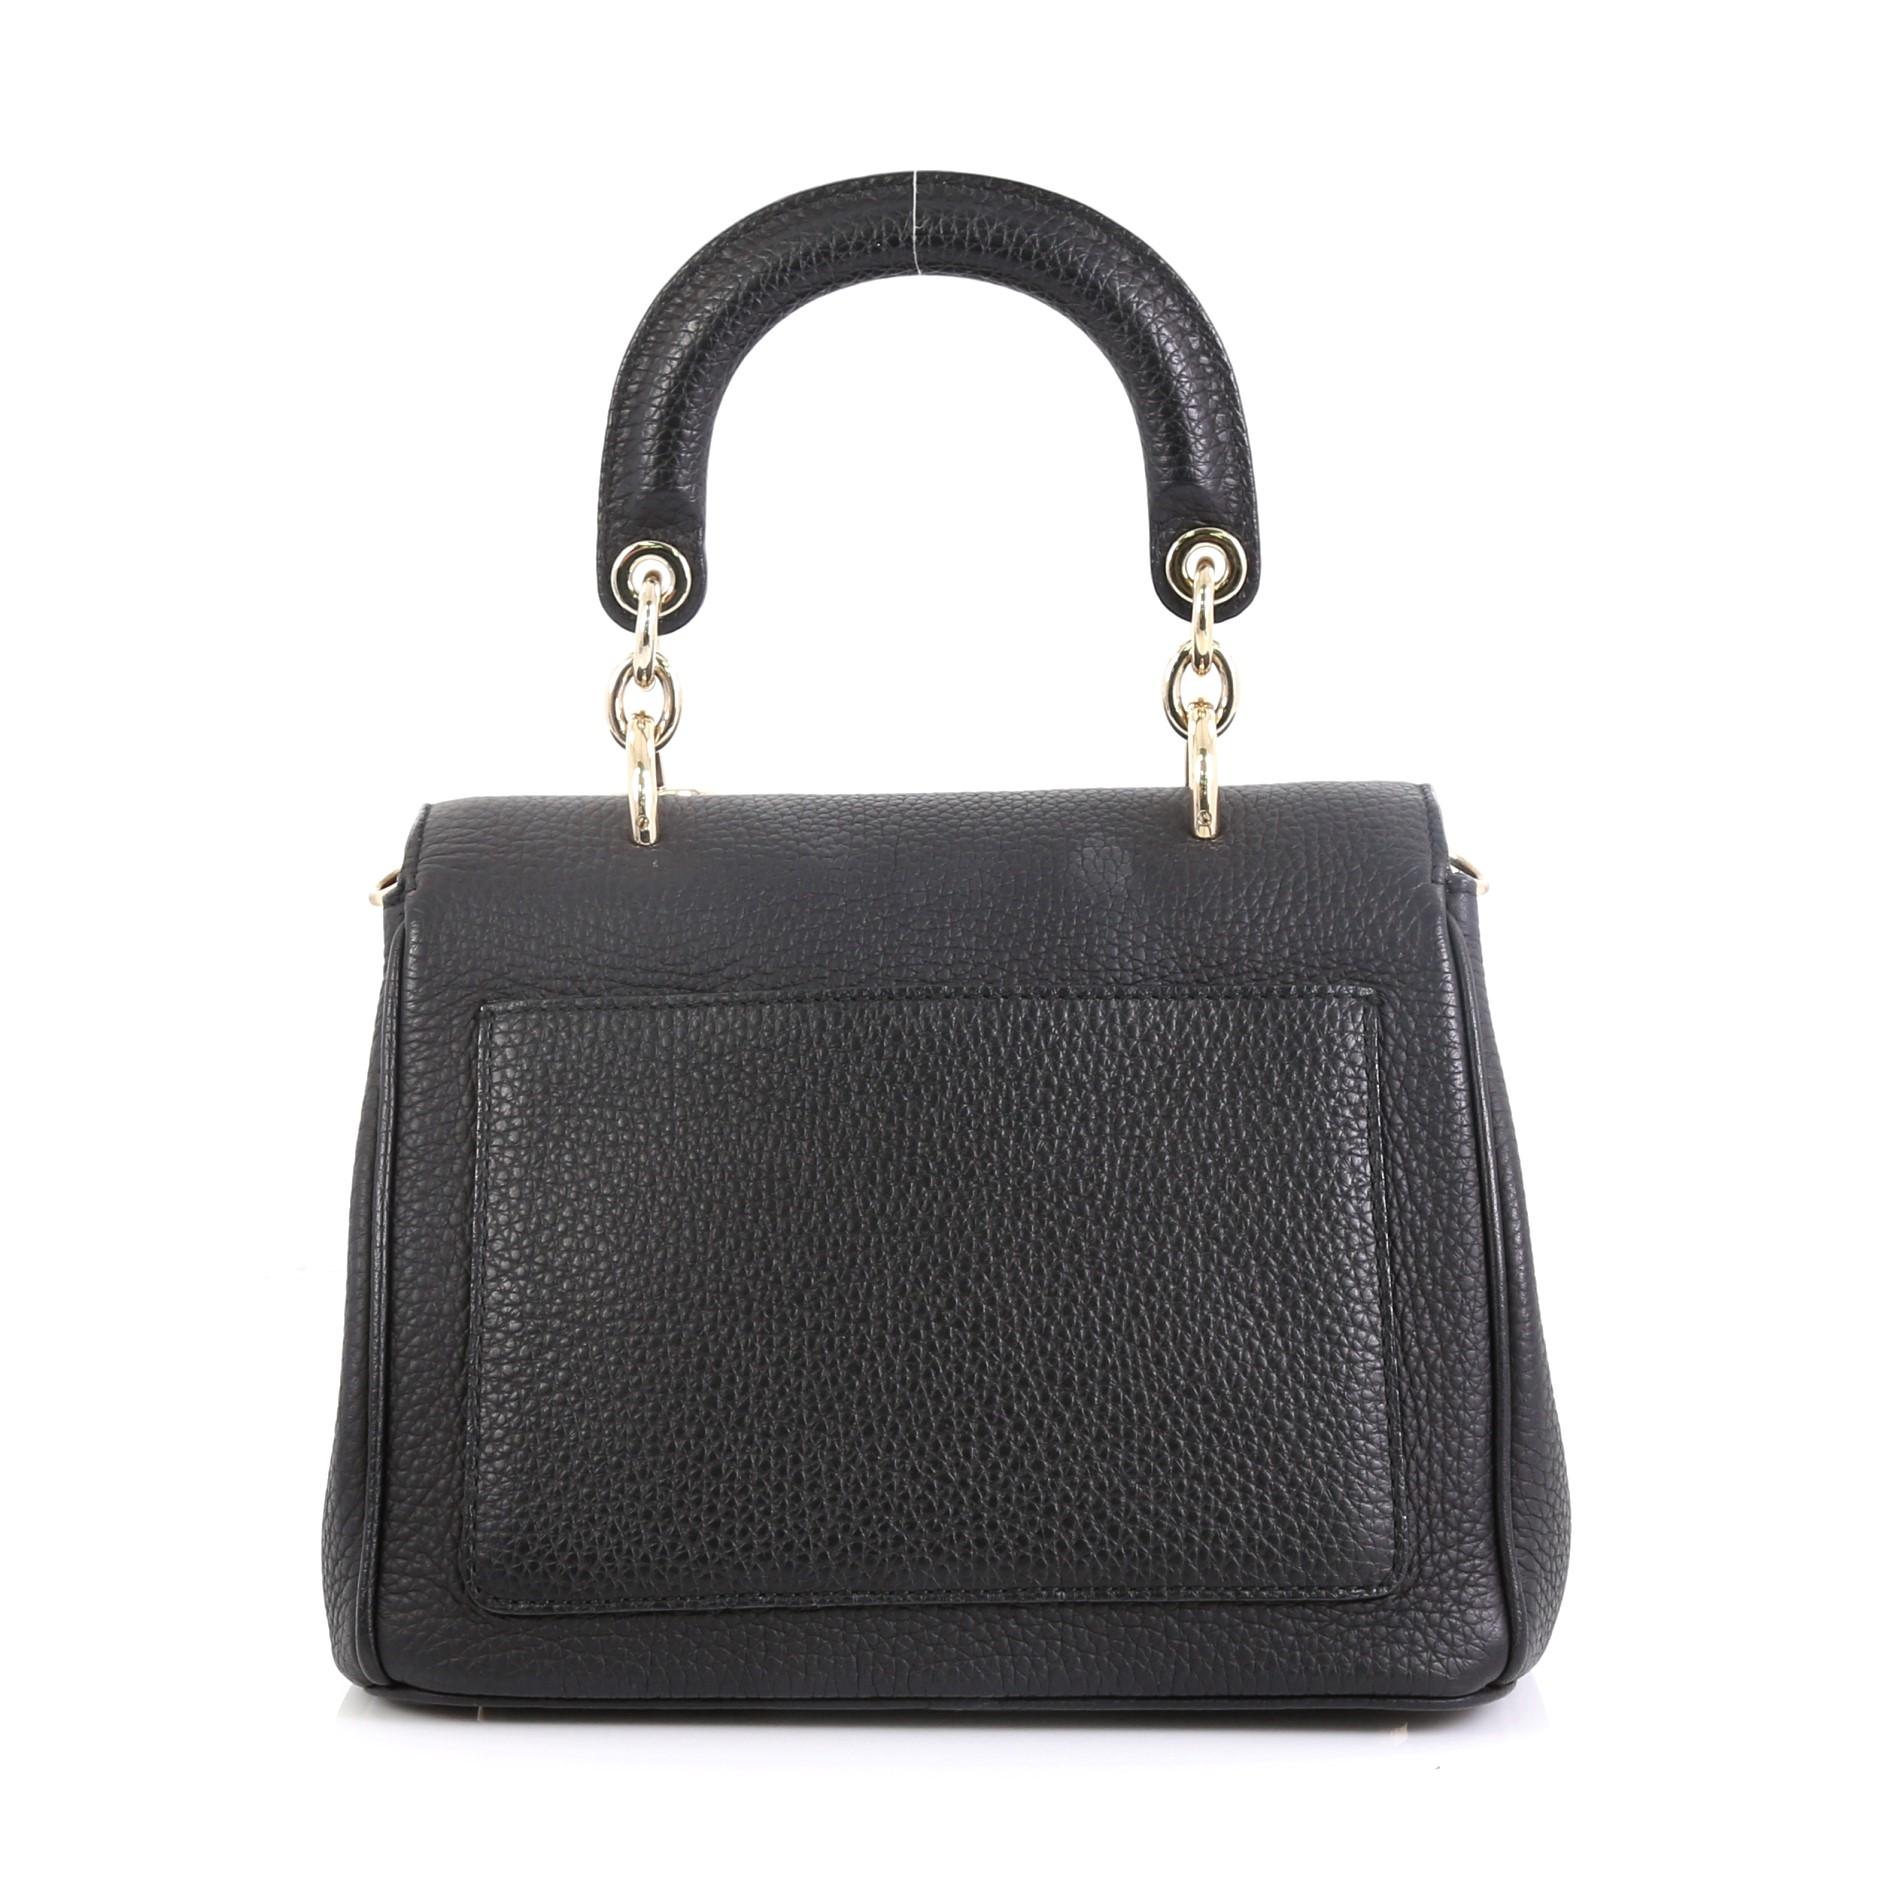 Black Christian Dior Be Dior Bag Pebbled Leather Small